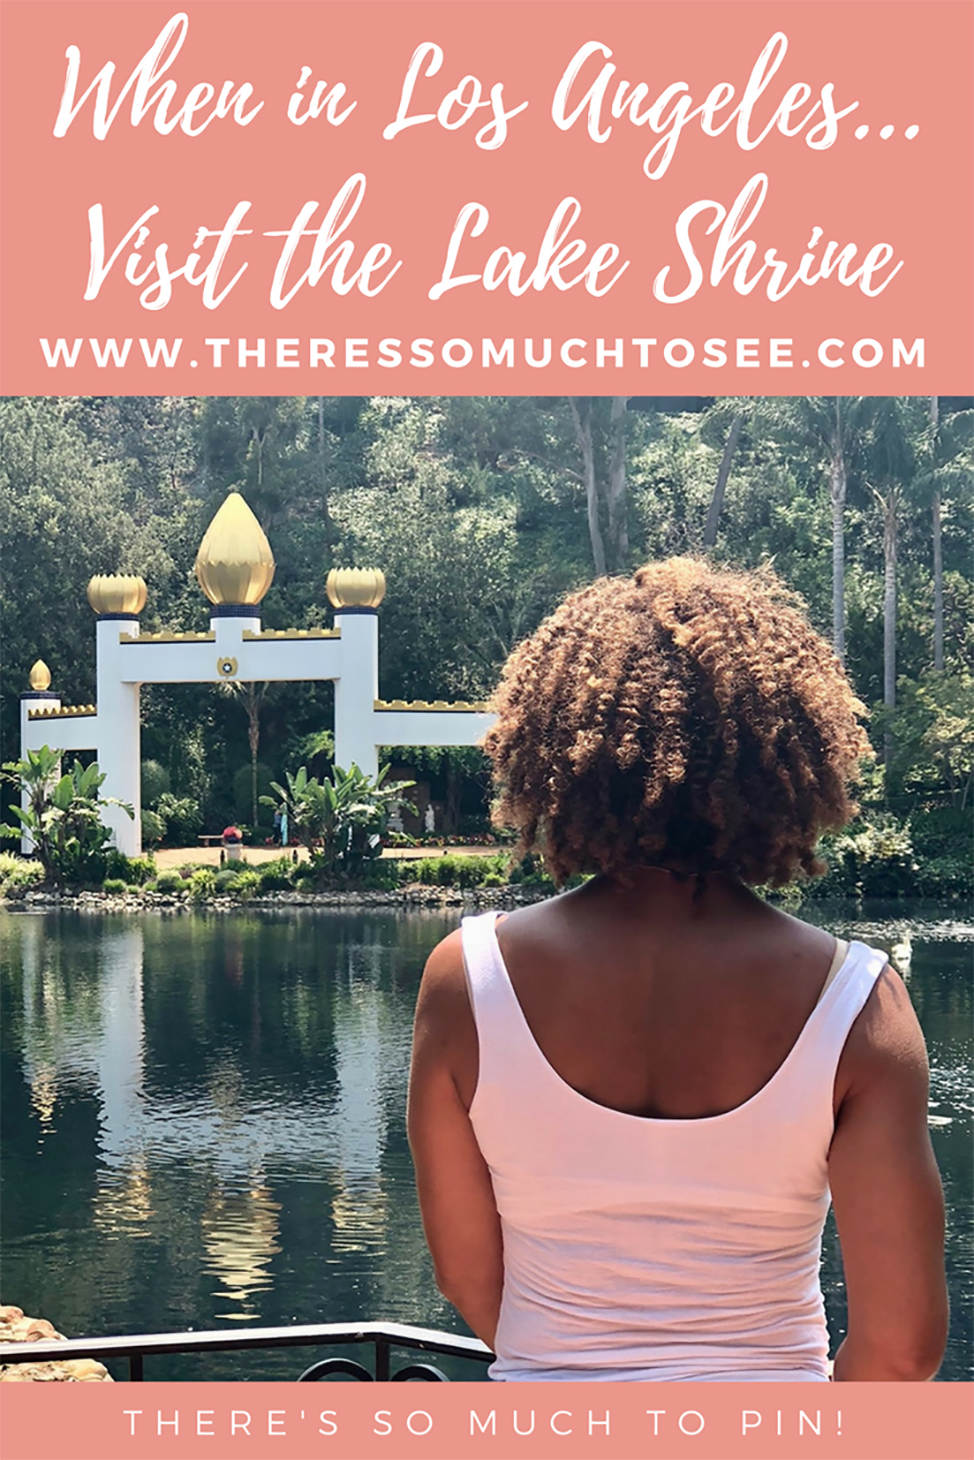 Looking for a little serenity in the crazy city of Los Angeles. Make a visit to the Self-Realization Fellowship Lake Shrine in Malibu for a peaceful getaway.